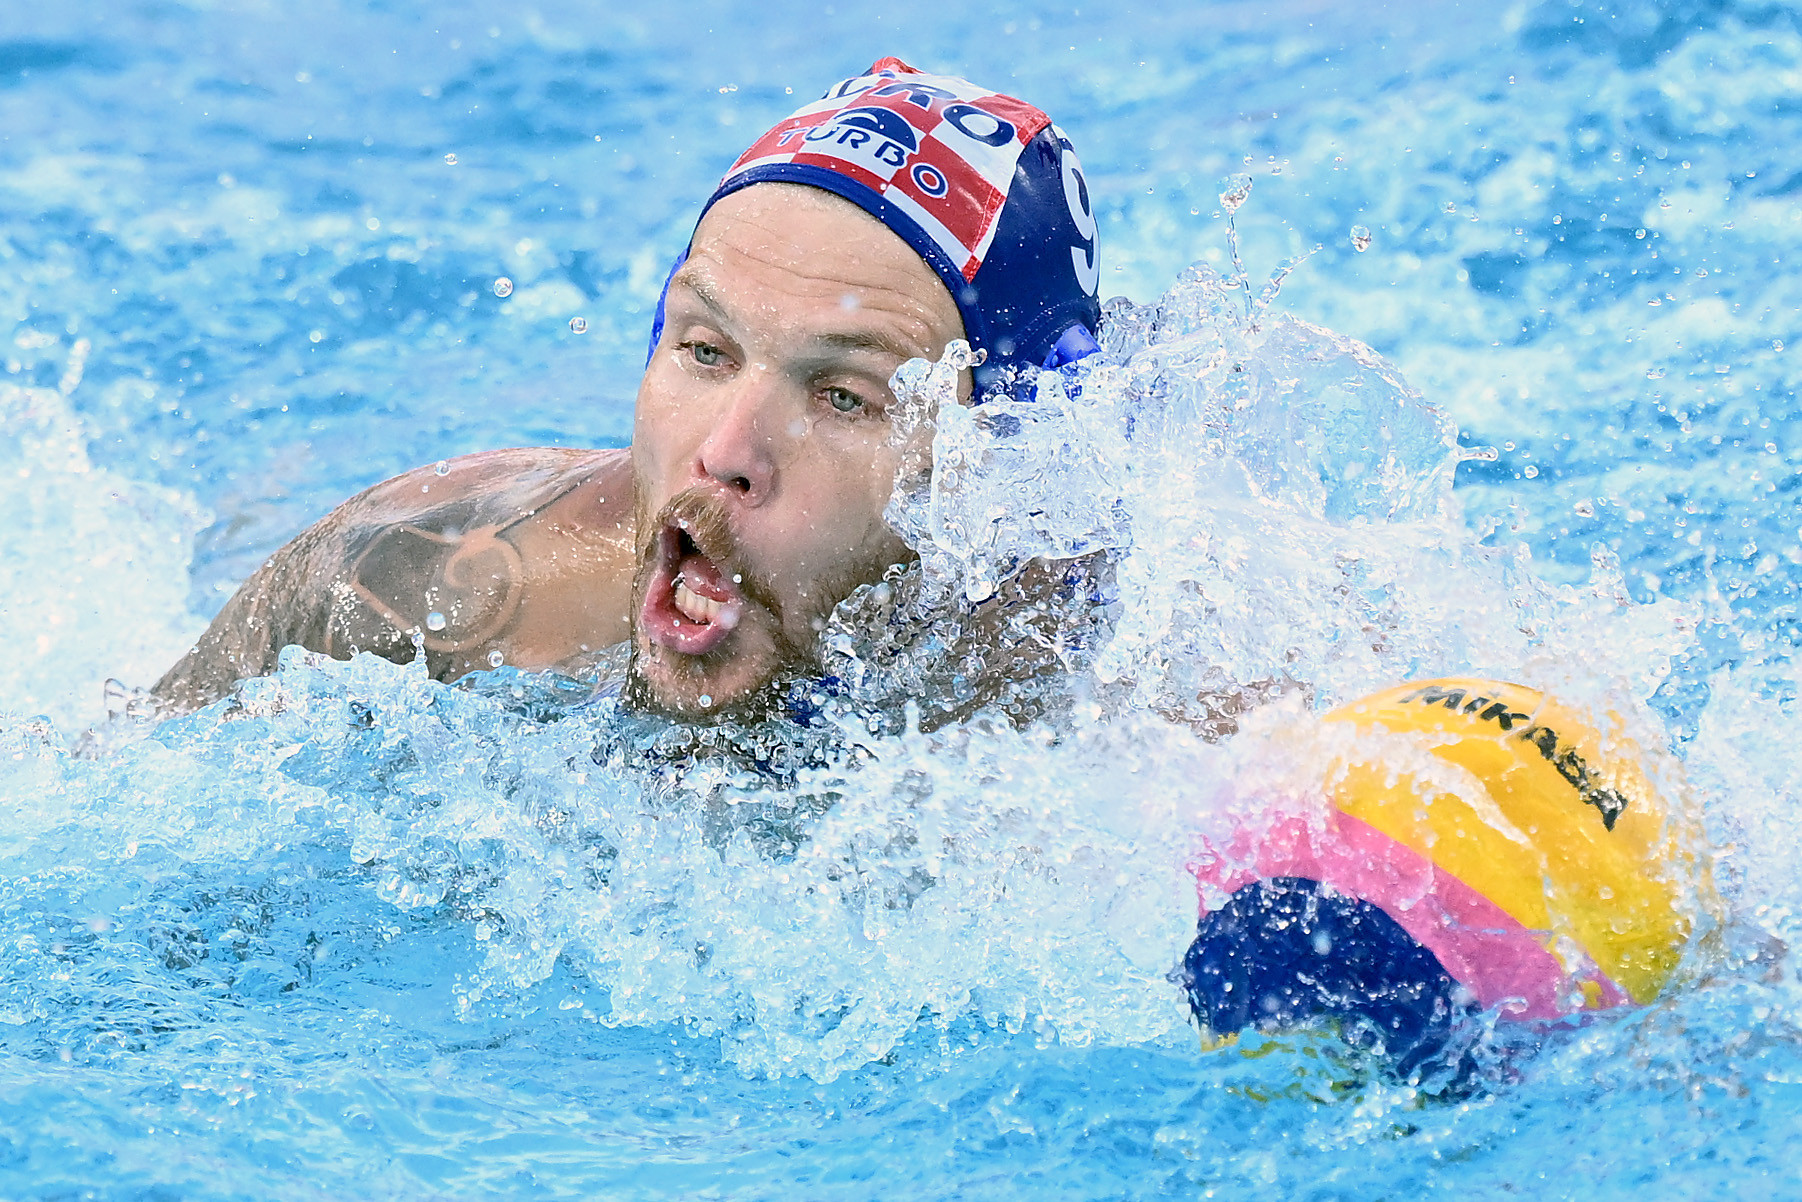 Hosts Croatia were among the quarter-finalists following the preliminary round matches at the Men's European Water Polo Championship ©Getty Images